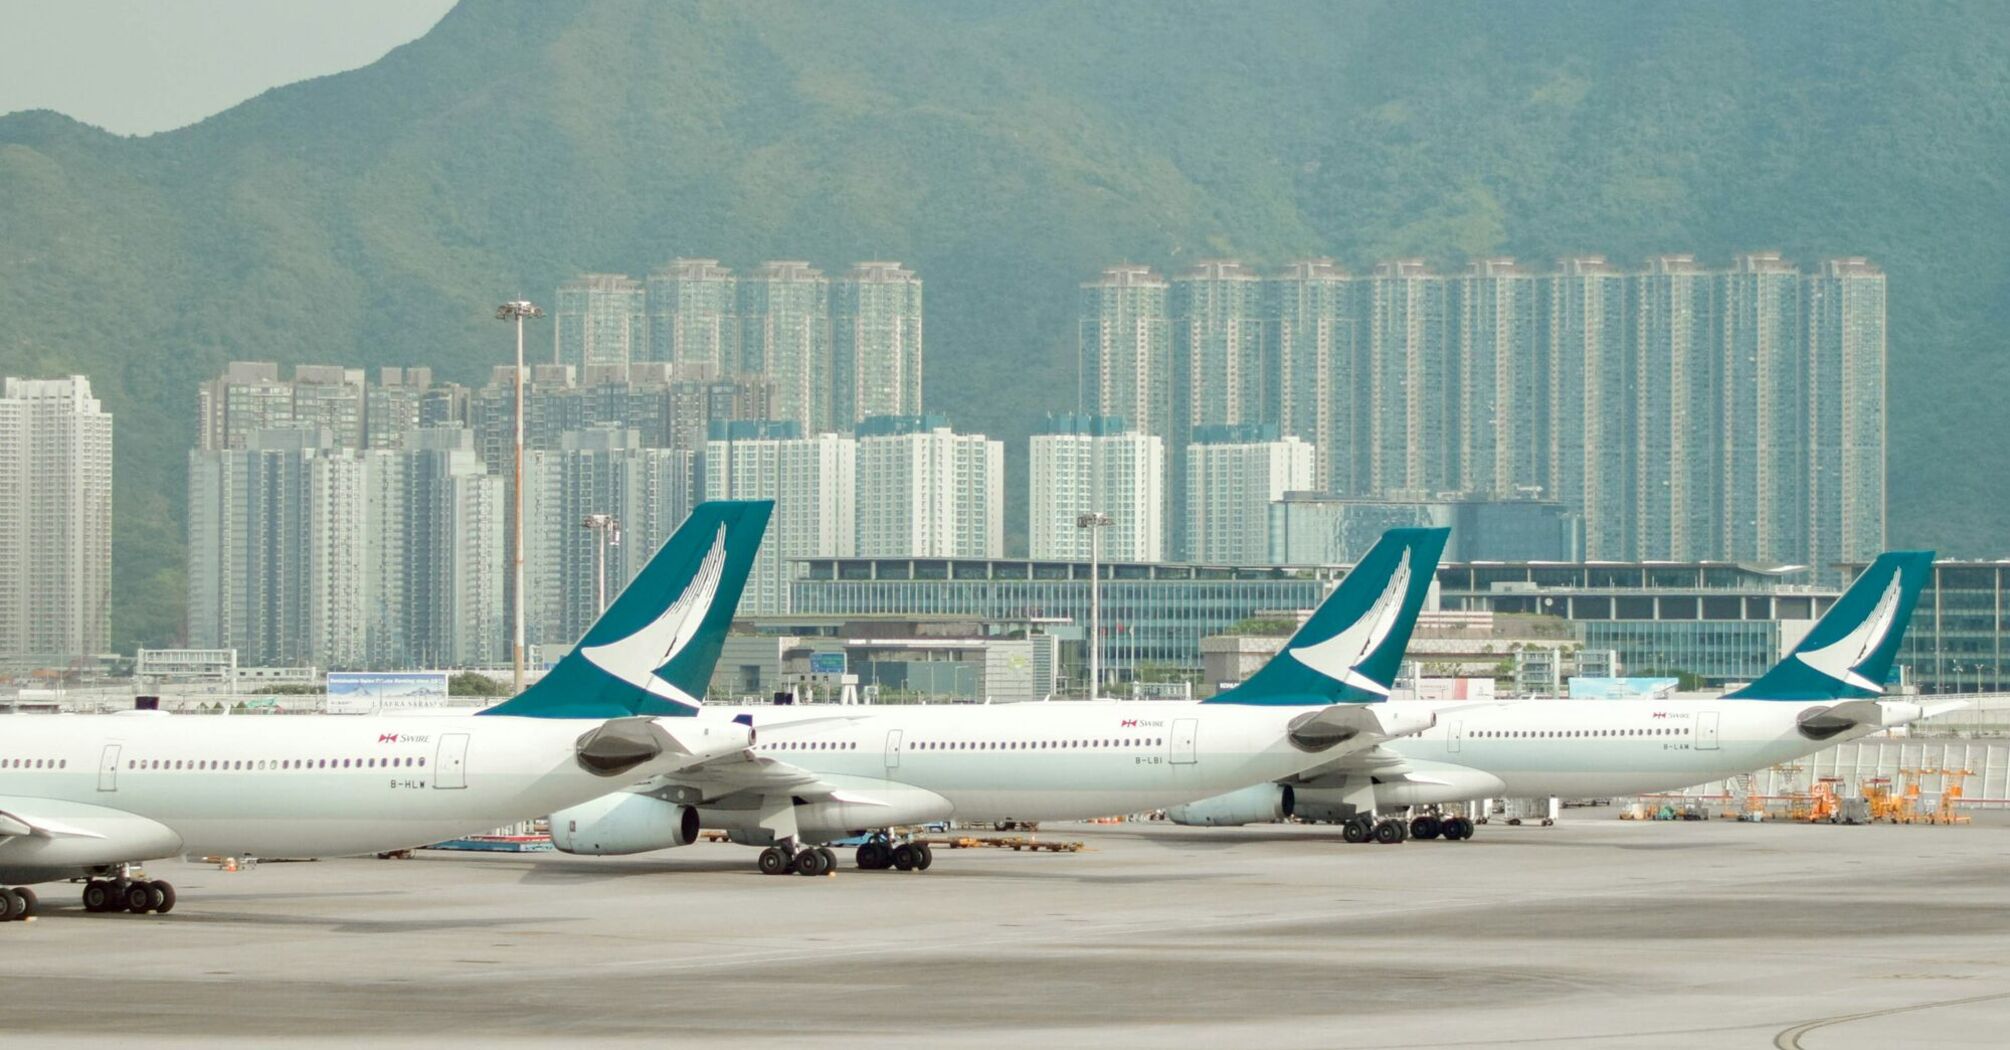 Airplanes lined up at Hong Kong airport with cityscape in the background